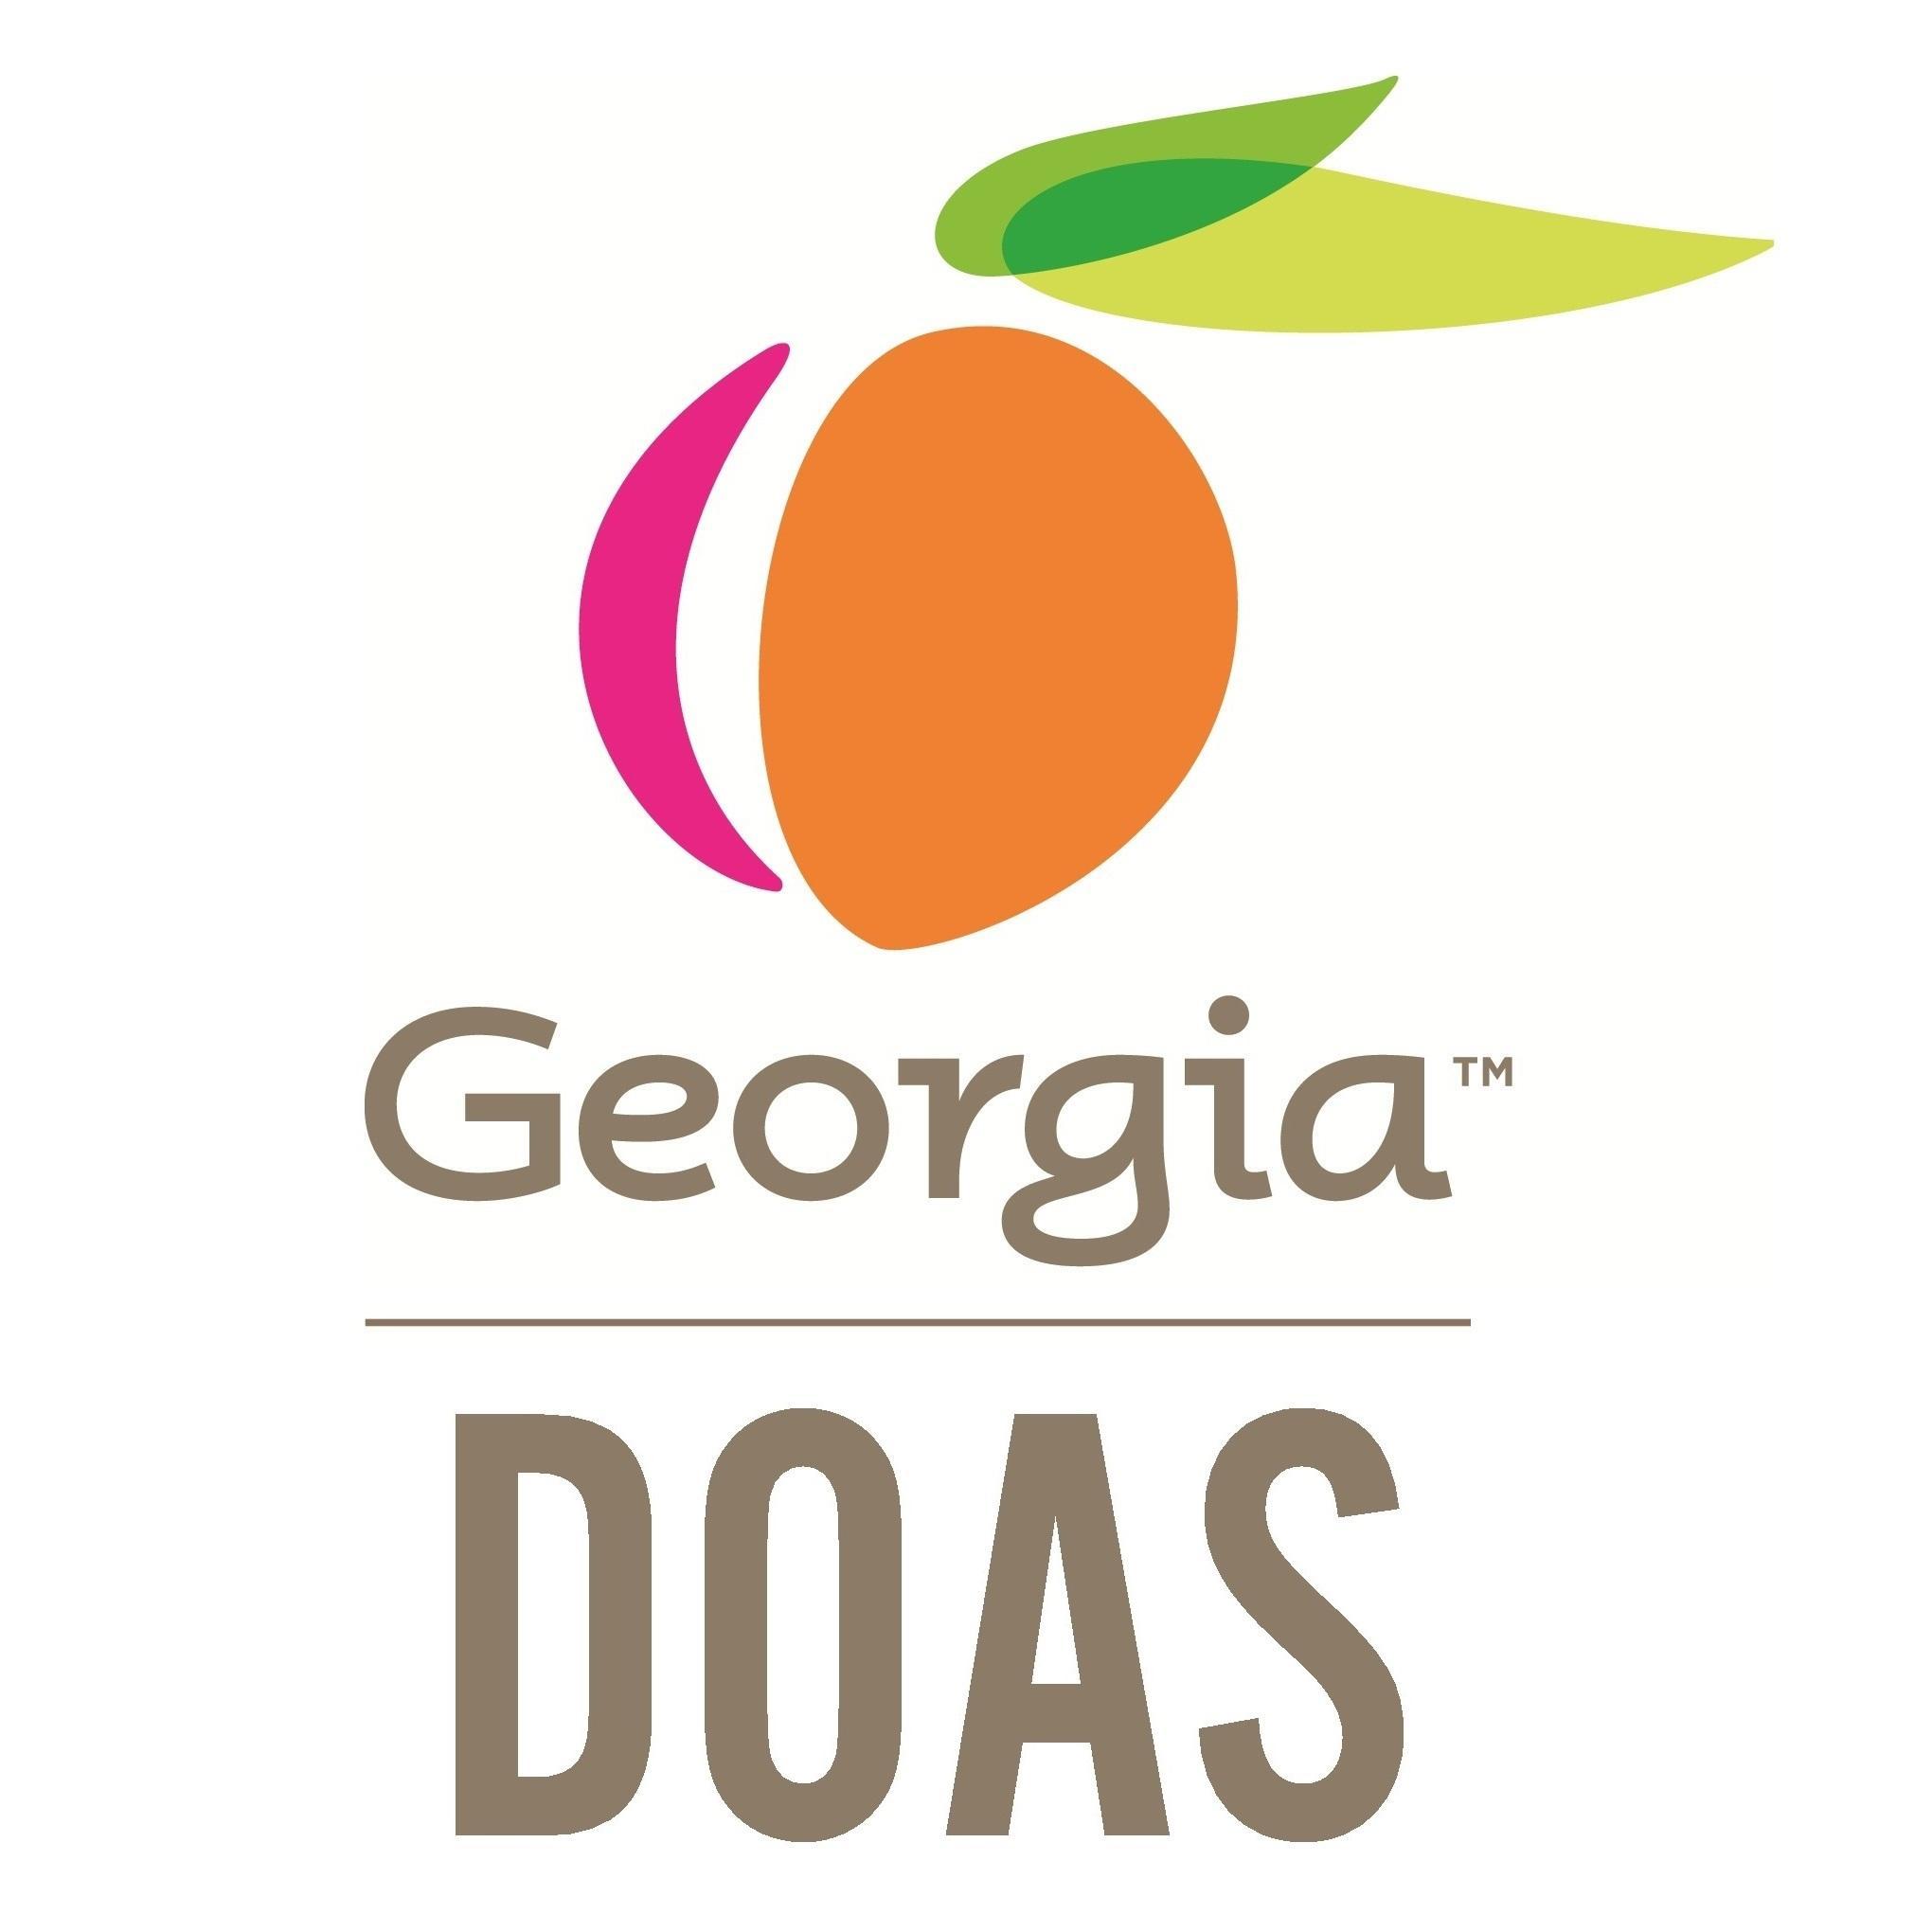 Georgia's Department of Administrative Services provides business solutions to state & local government. Check out @GaStateSurplus for auctions! #TeamGa #GaGov